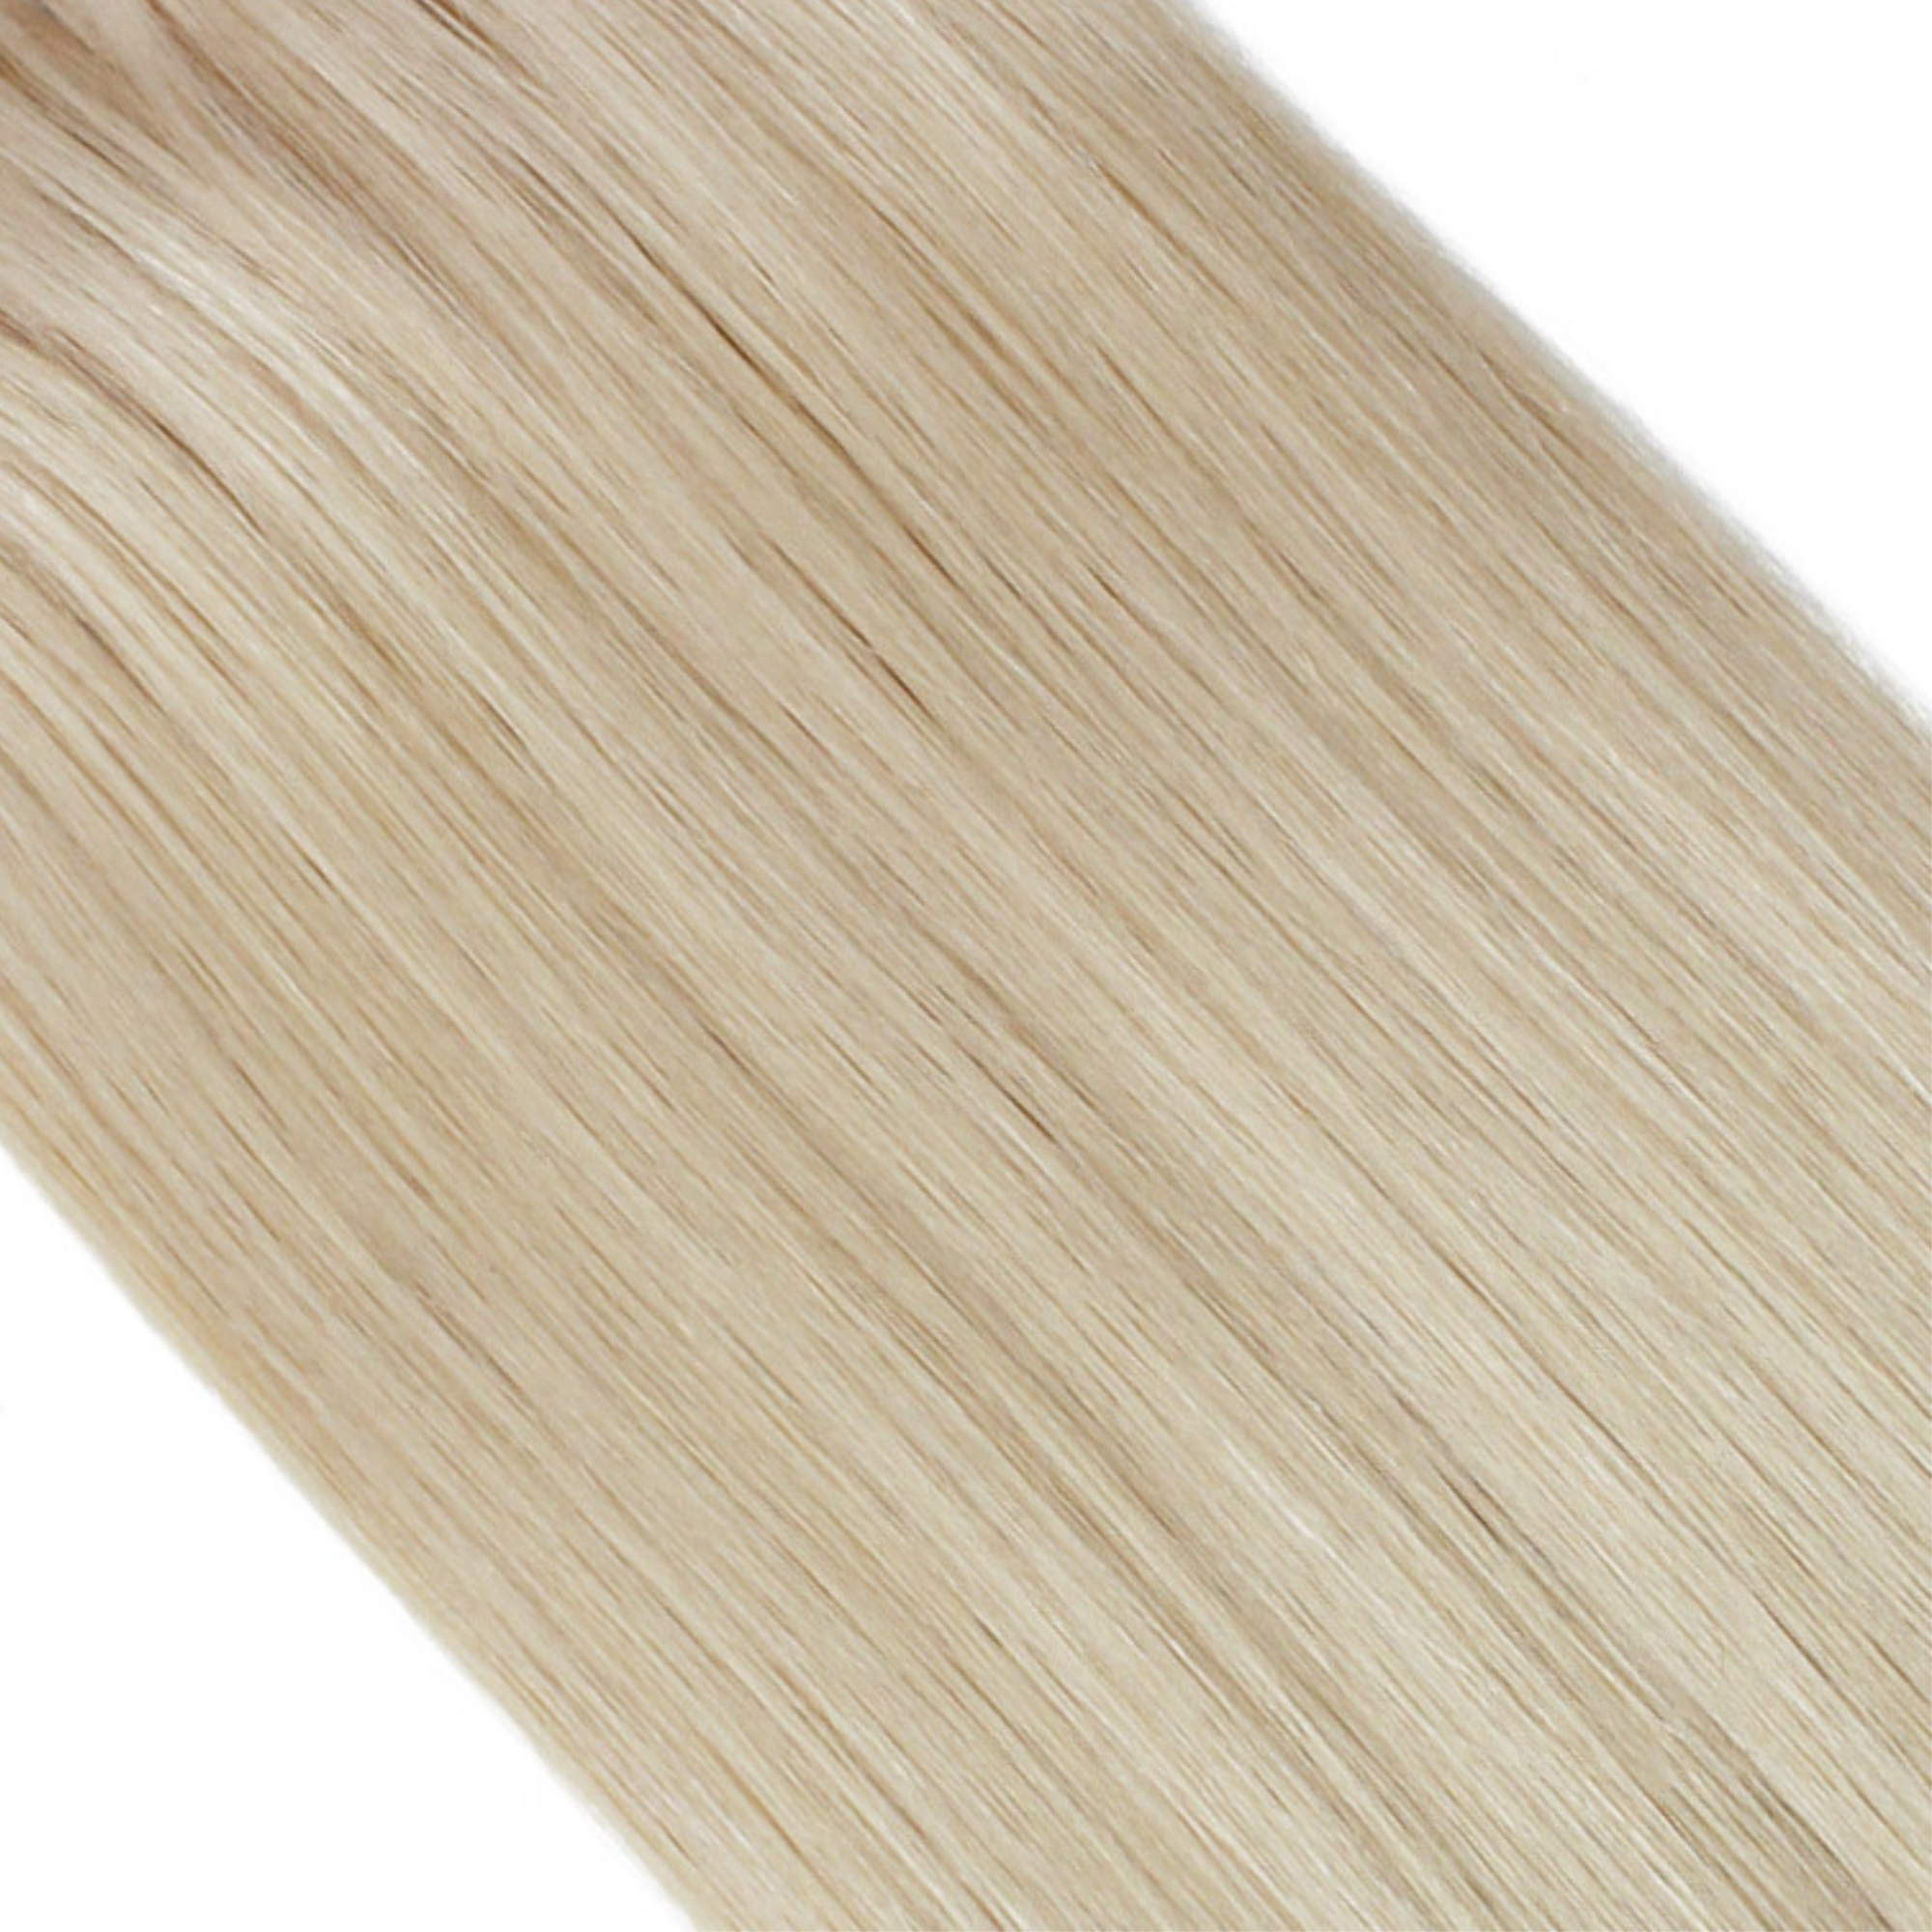 "hair rehab london 22" tape hair extensions shade swatch titled blonde af"